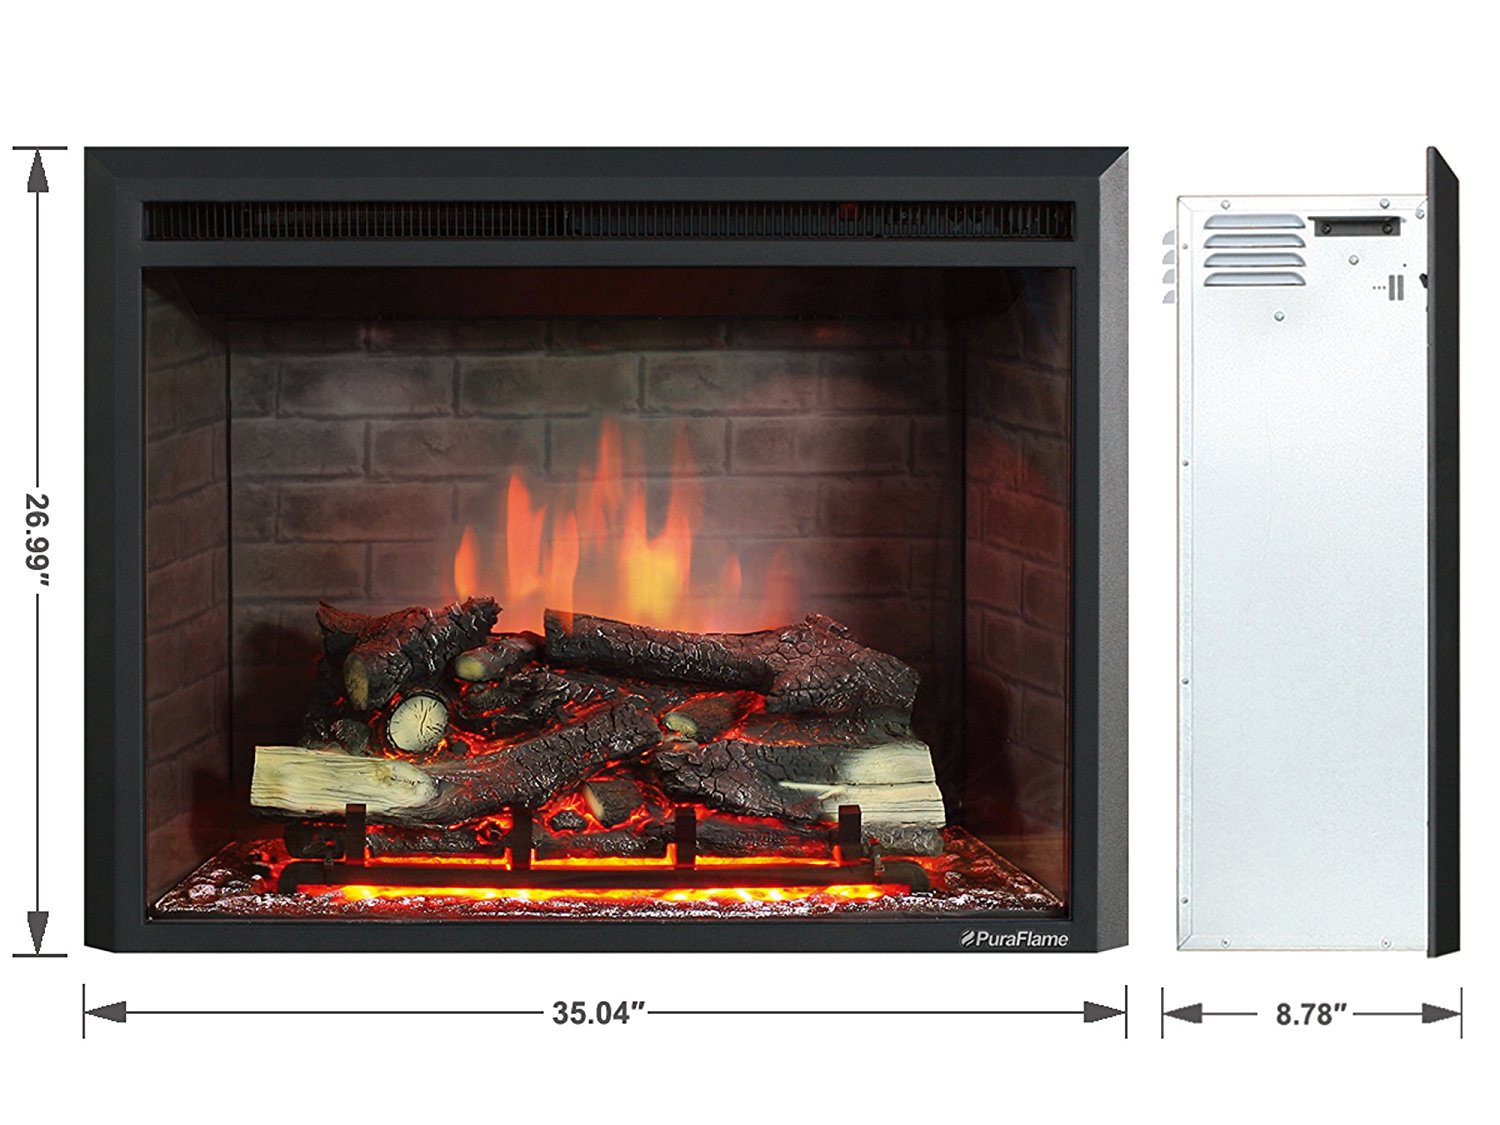 PuraFlame Western 33 inch Embedded Electric Firebox Heater With Remote Control, Black